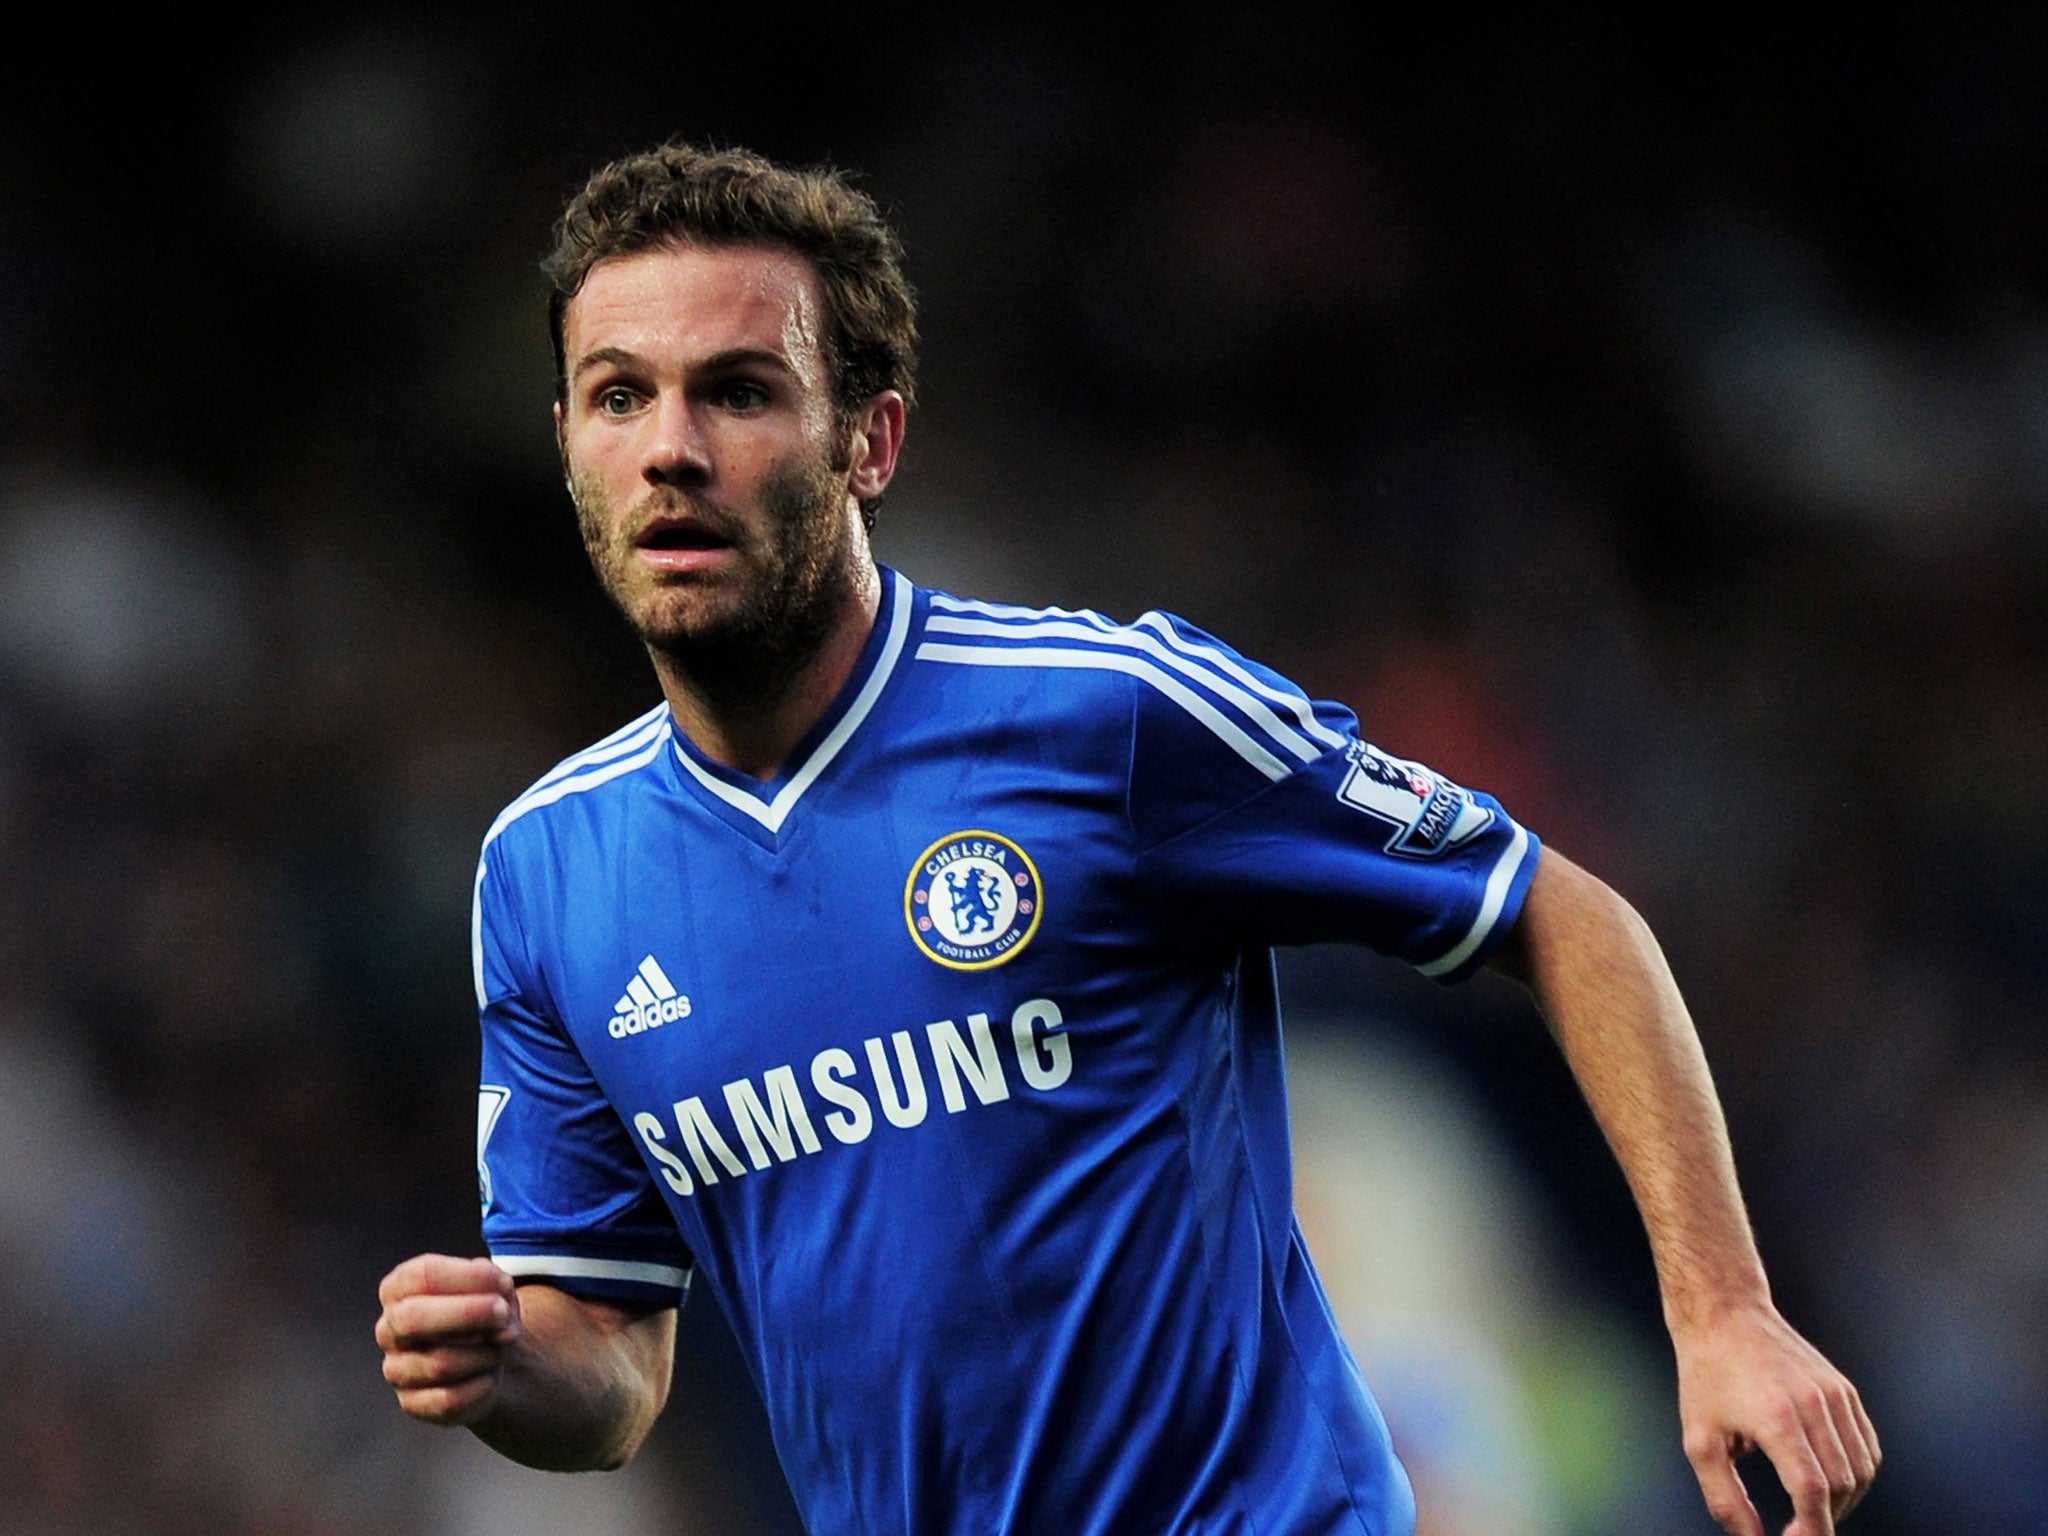 Juan Mata’s £37m sale was driven by Chelsea’s consideration of their FFP position